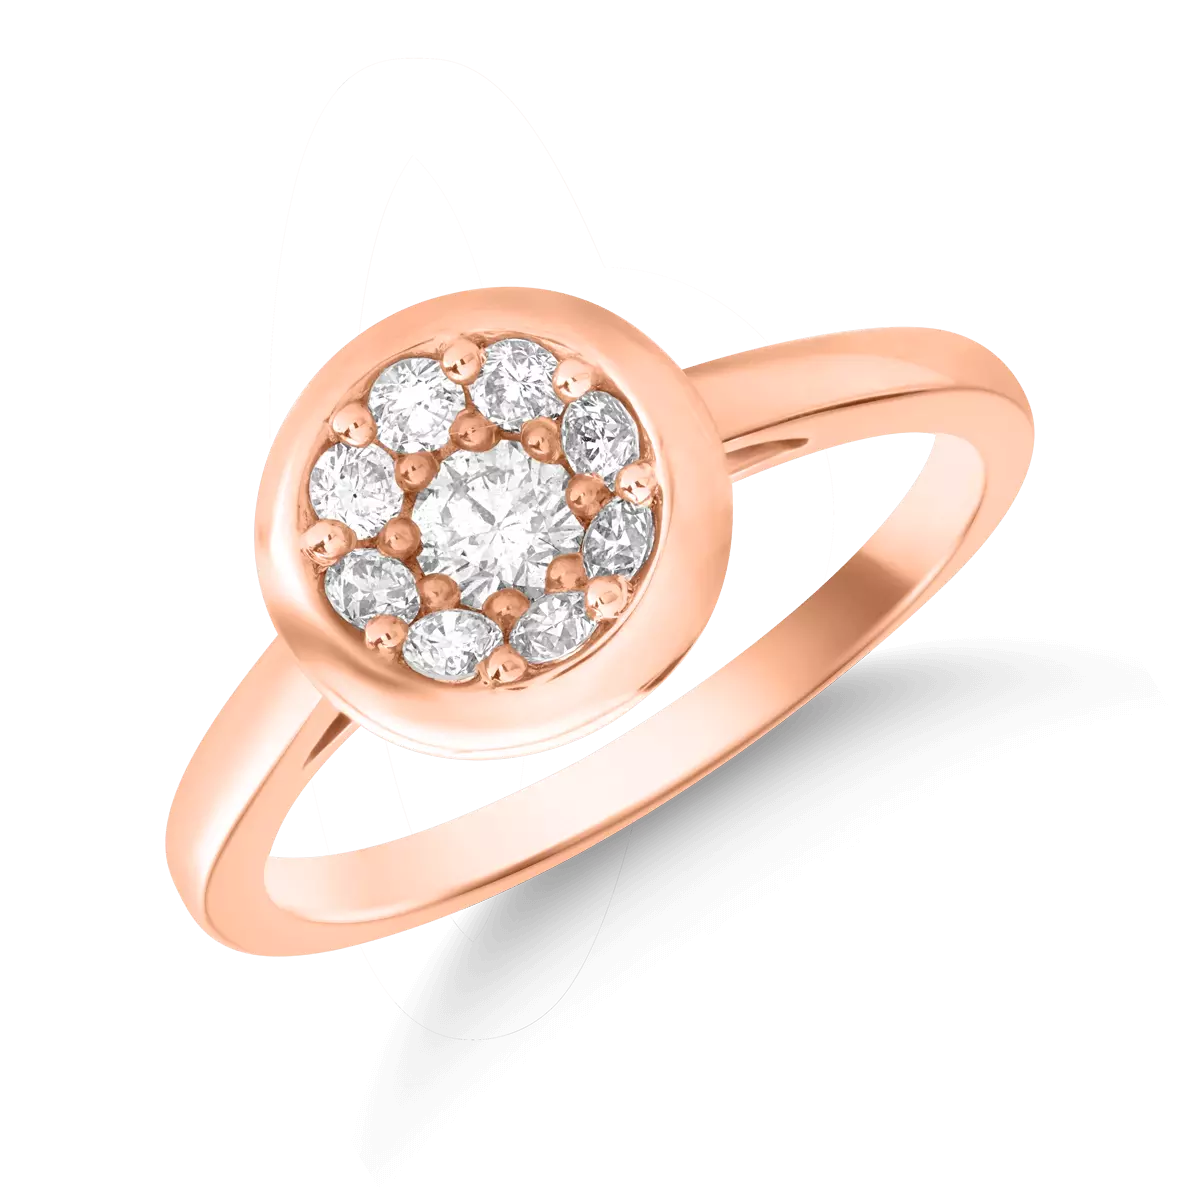 14K rose gold ring with 0.43ct diamonds